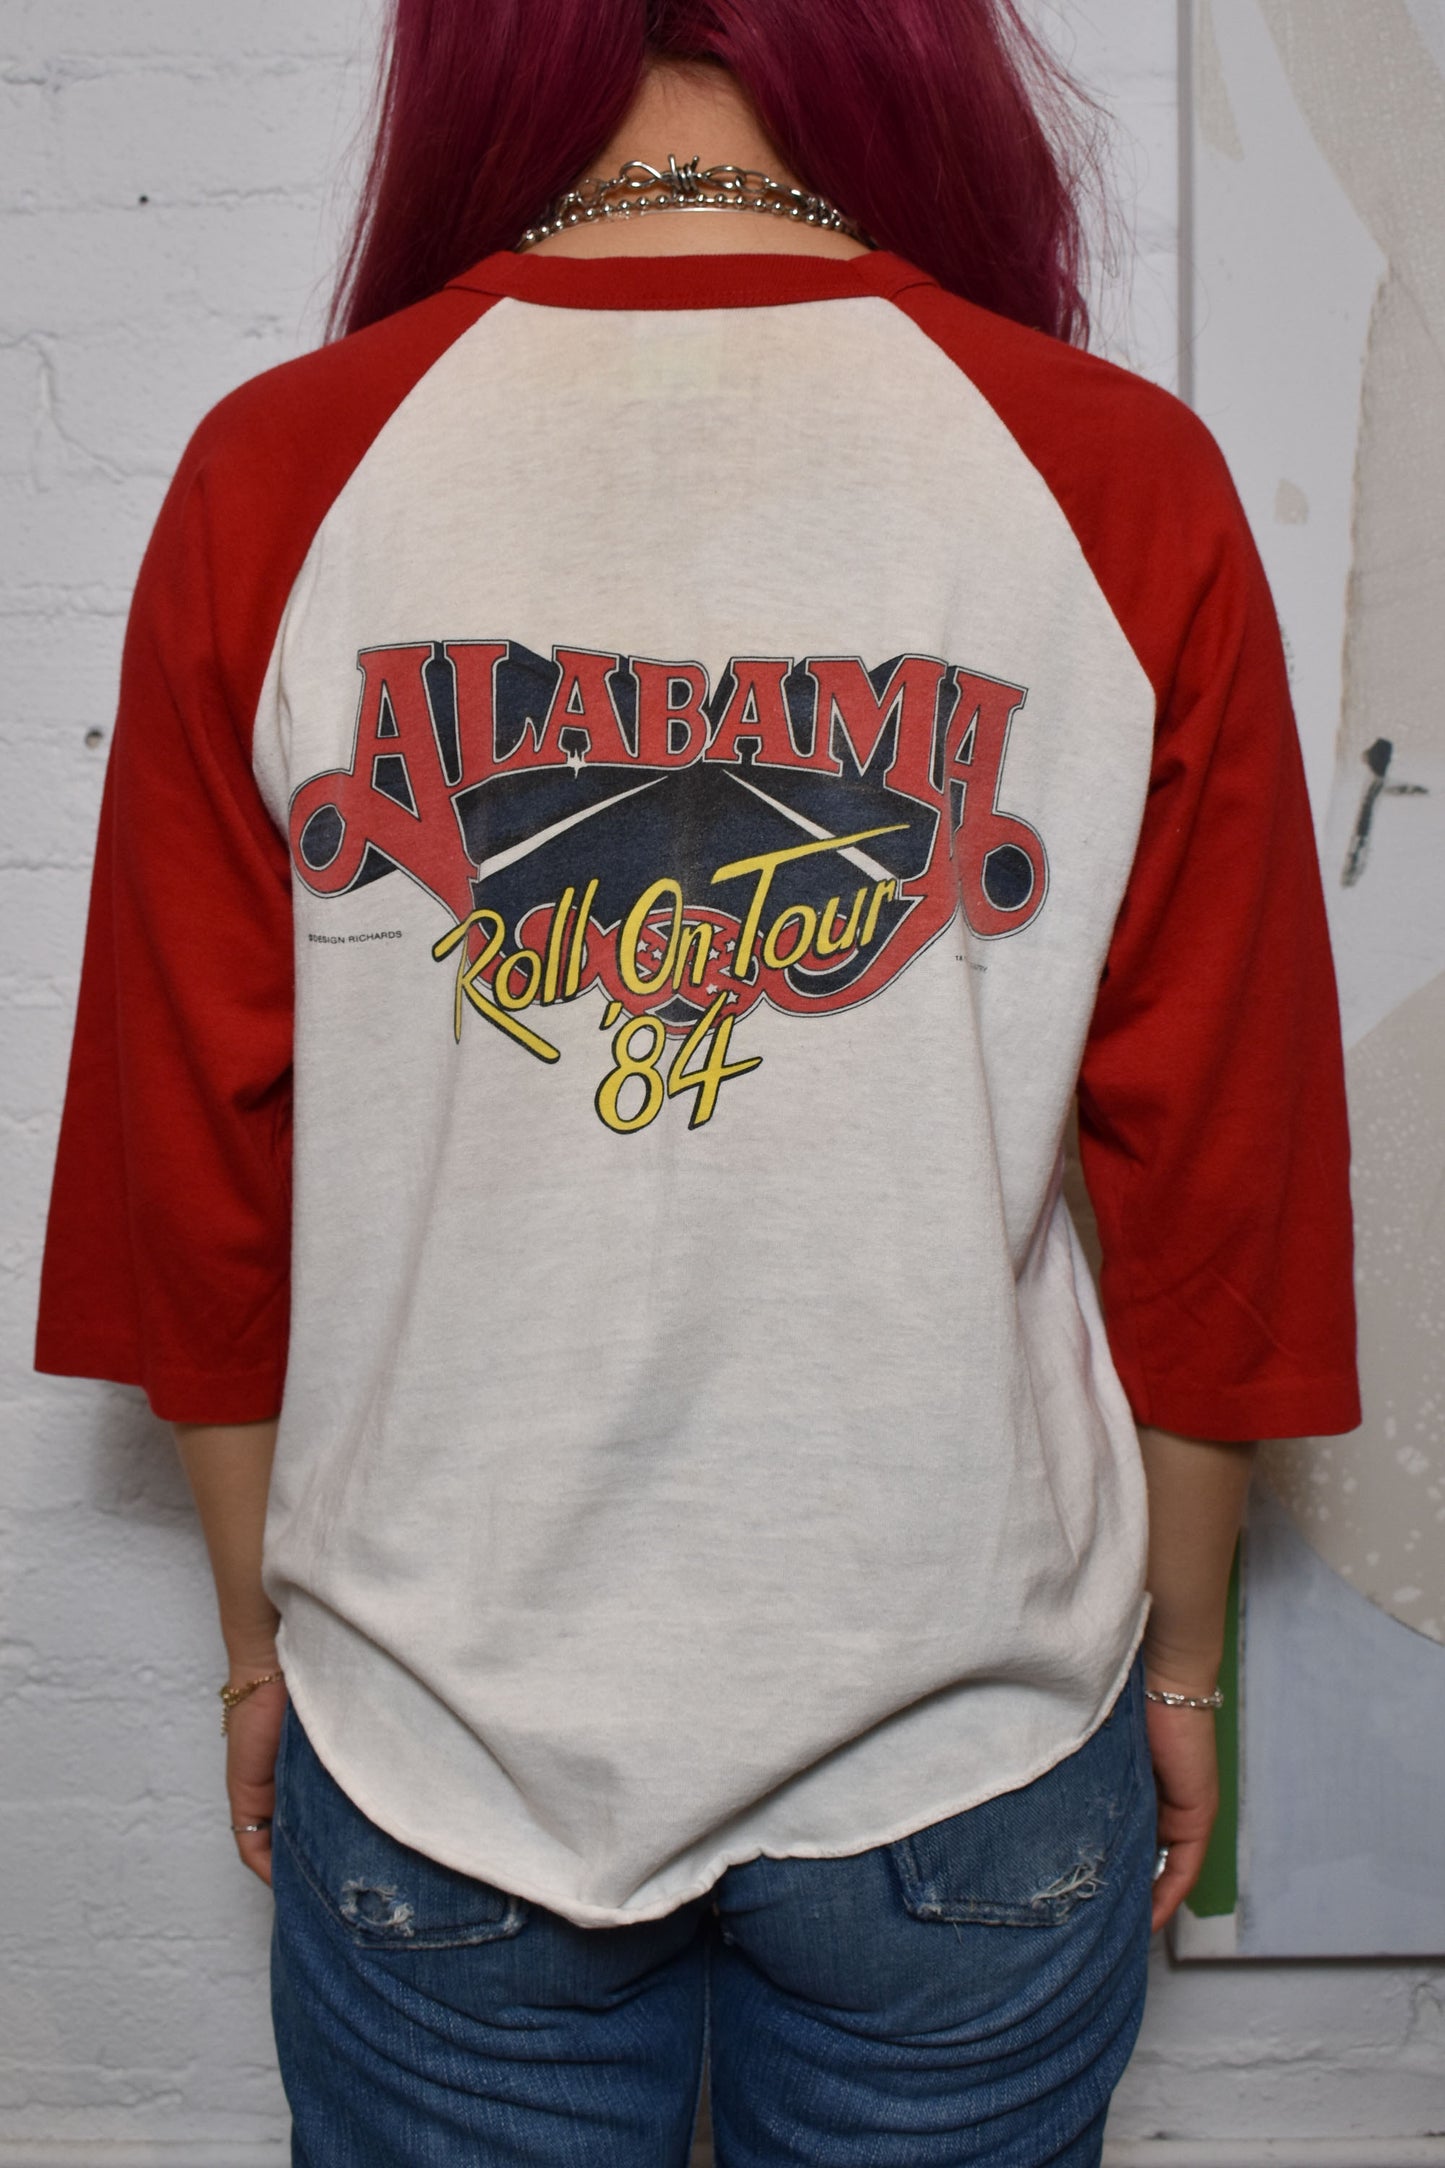 Vintage 1984 Alabama Roll On Tour T-shirt. 3/4 Red Sleeve